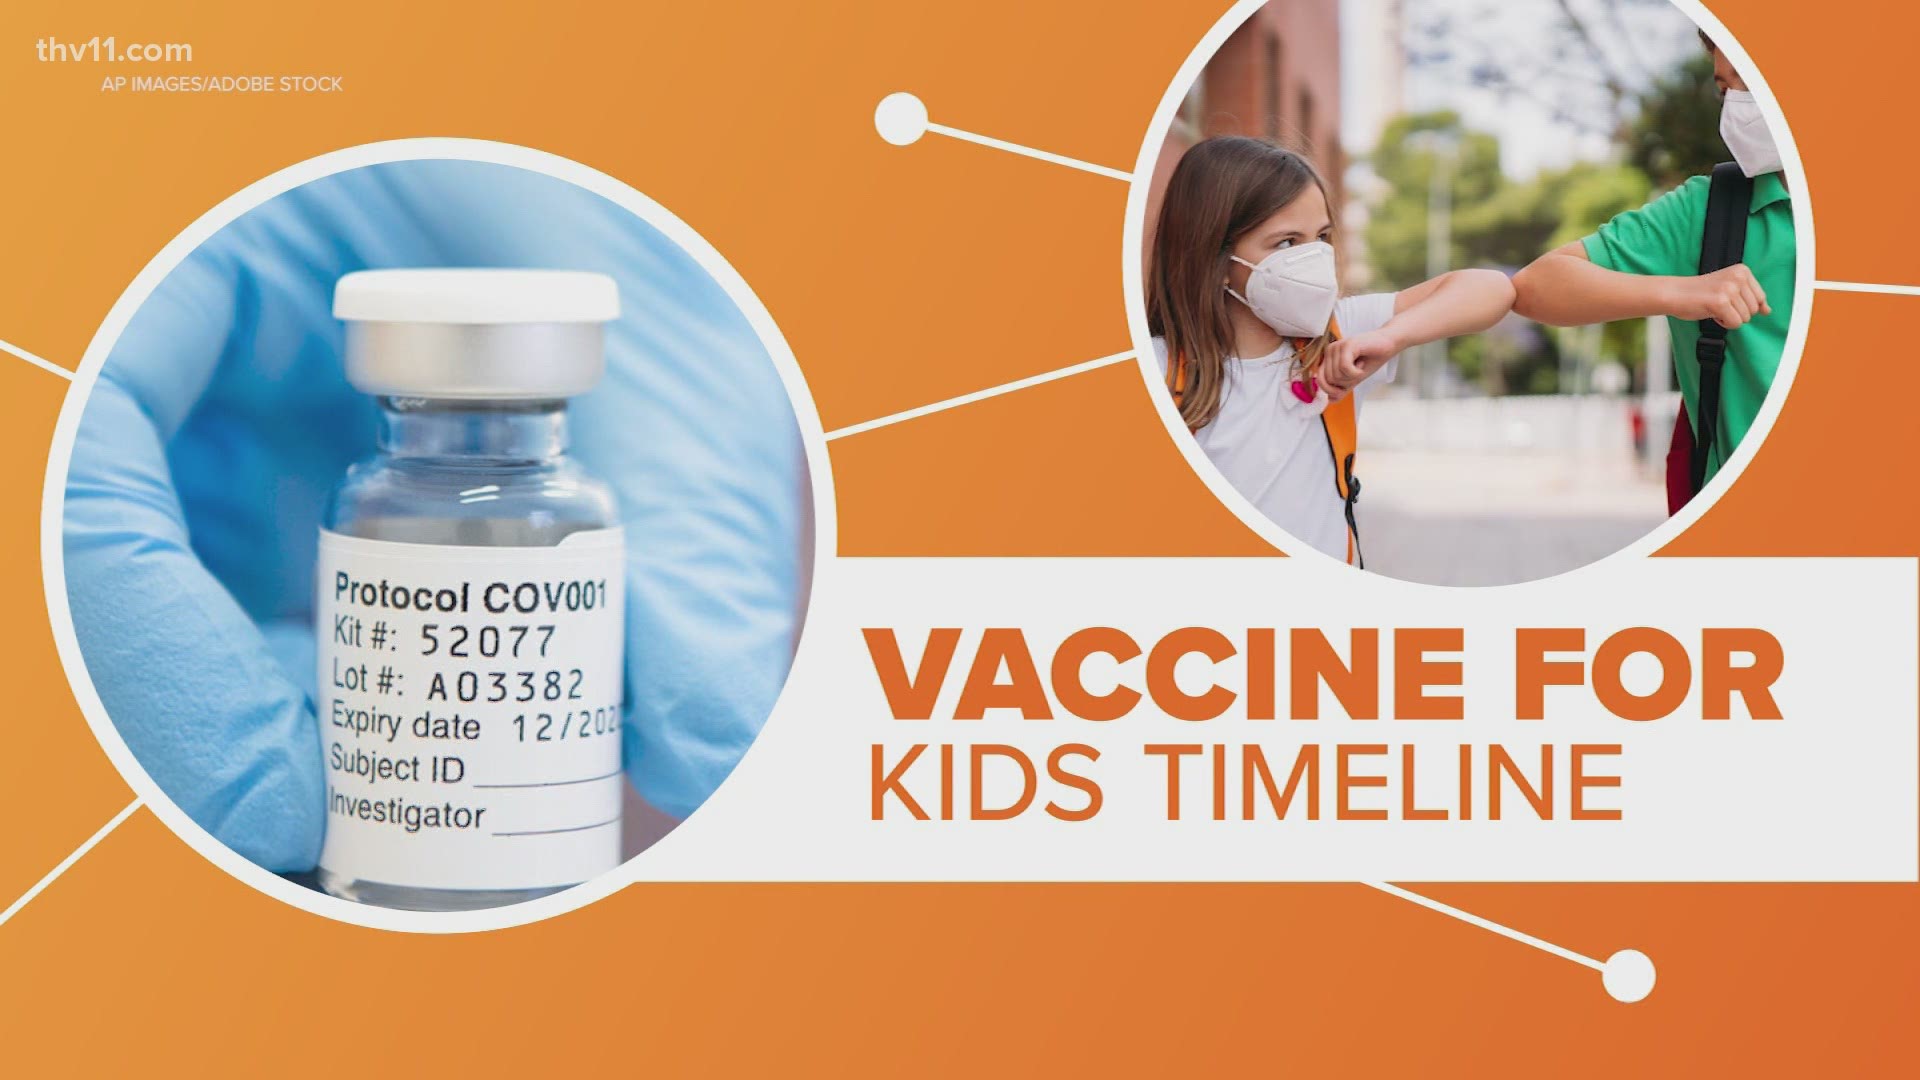 Along with the push for masks, work is underway to get the COVID-19 vaccines for kids. Pzifer and Moderna shots are approved for those 12 and up.